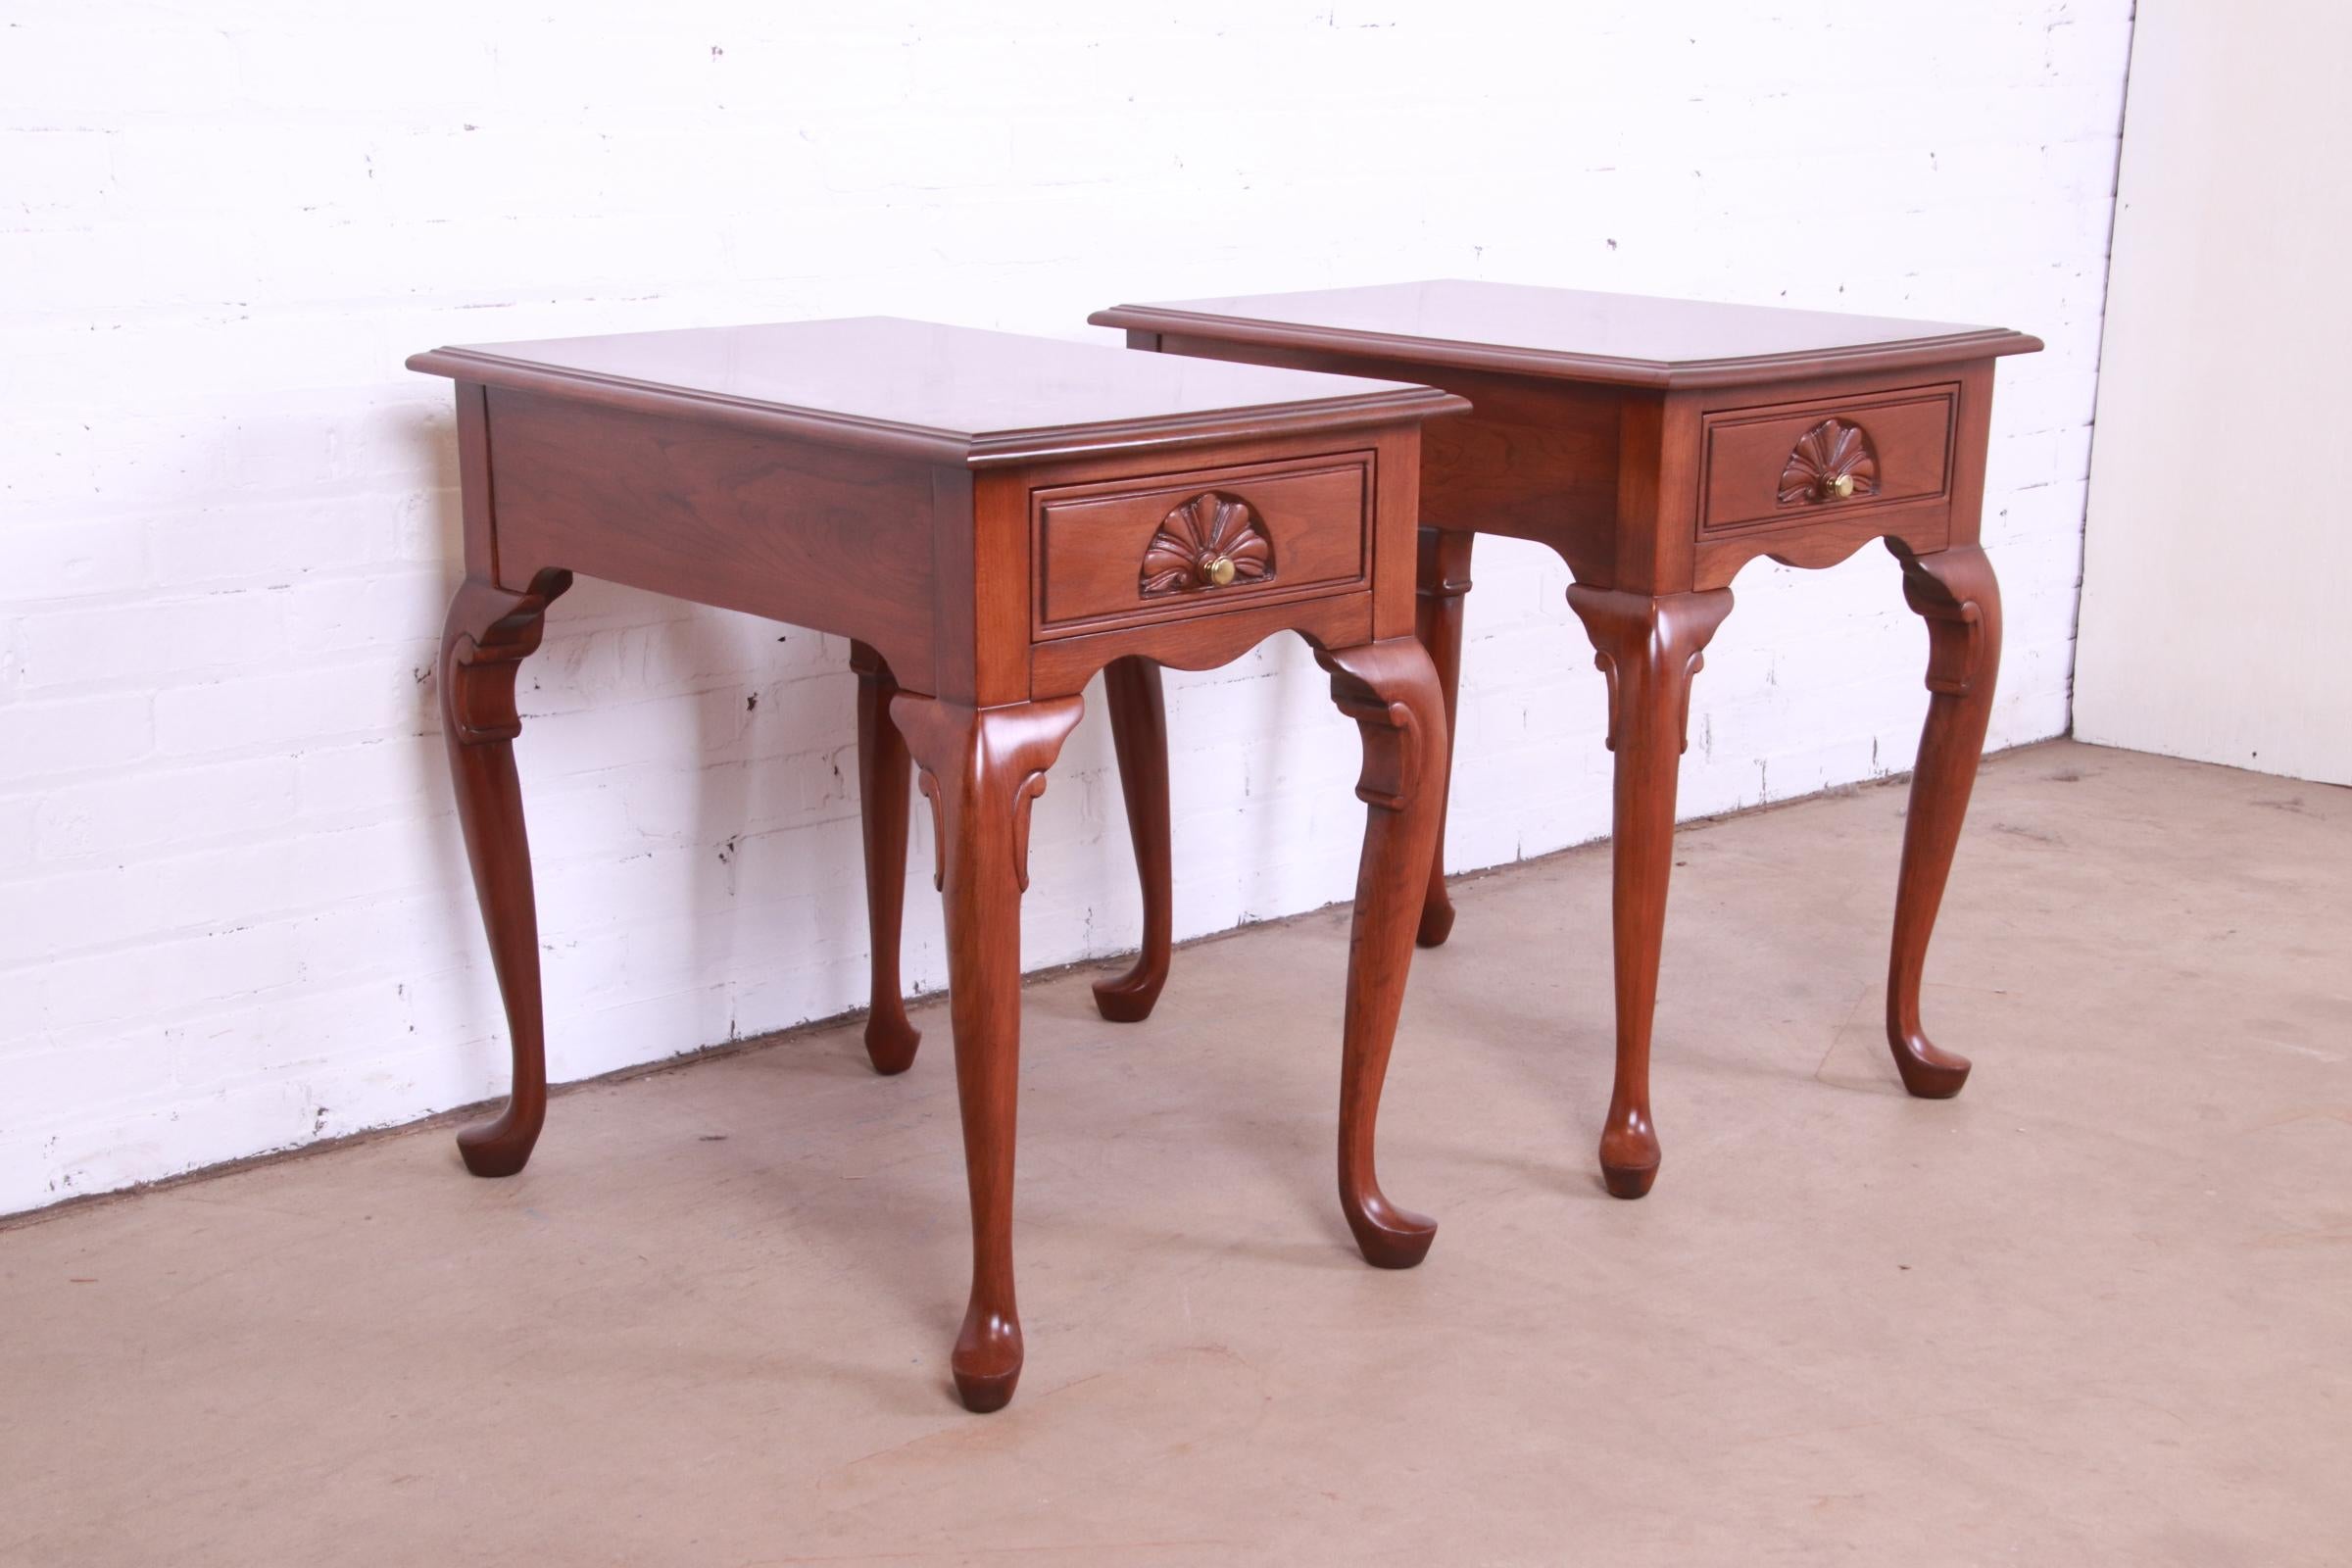 Harden Furniture Queen Anne Solid Cherry Wood Nightstands or End Tables, Pair In Good Condition For Sale In South Bend, IN